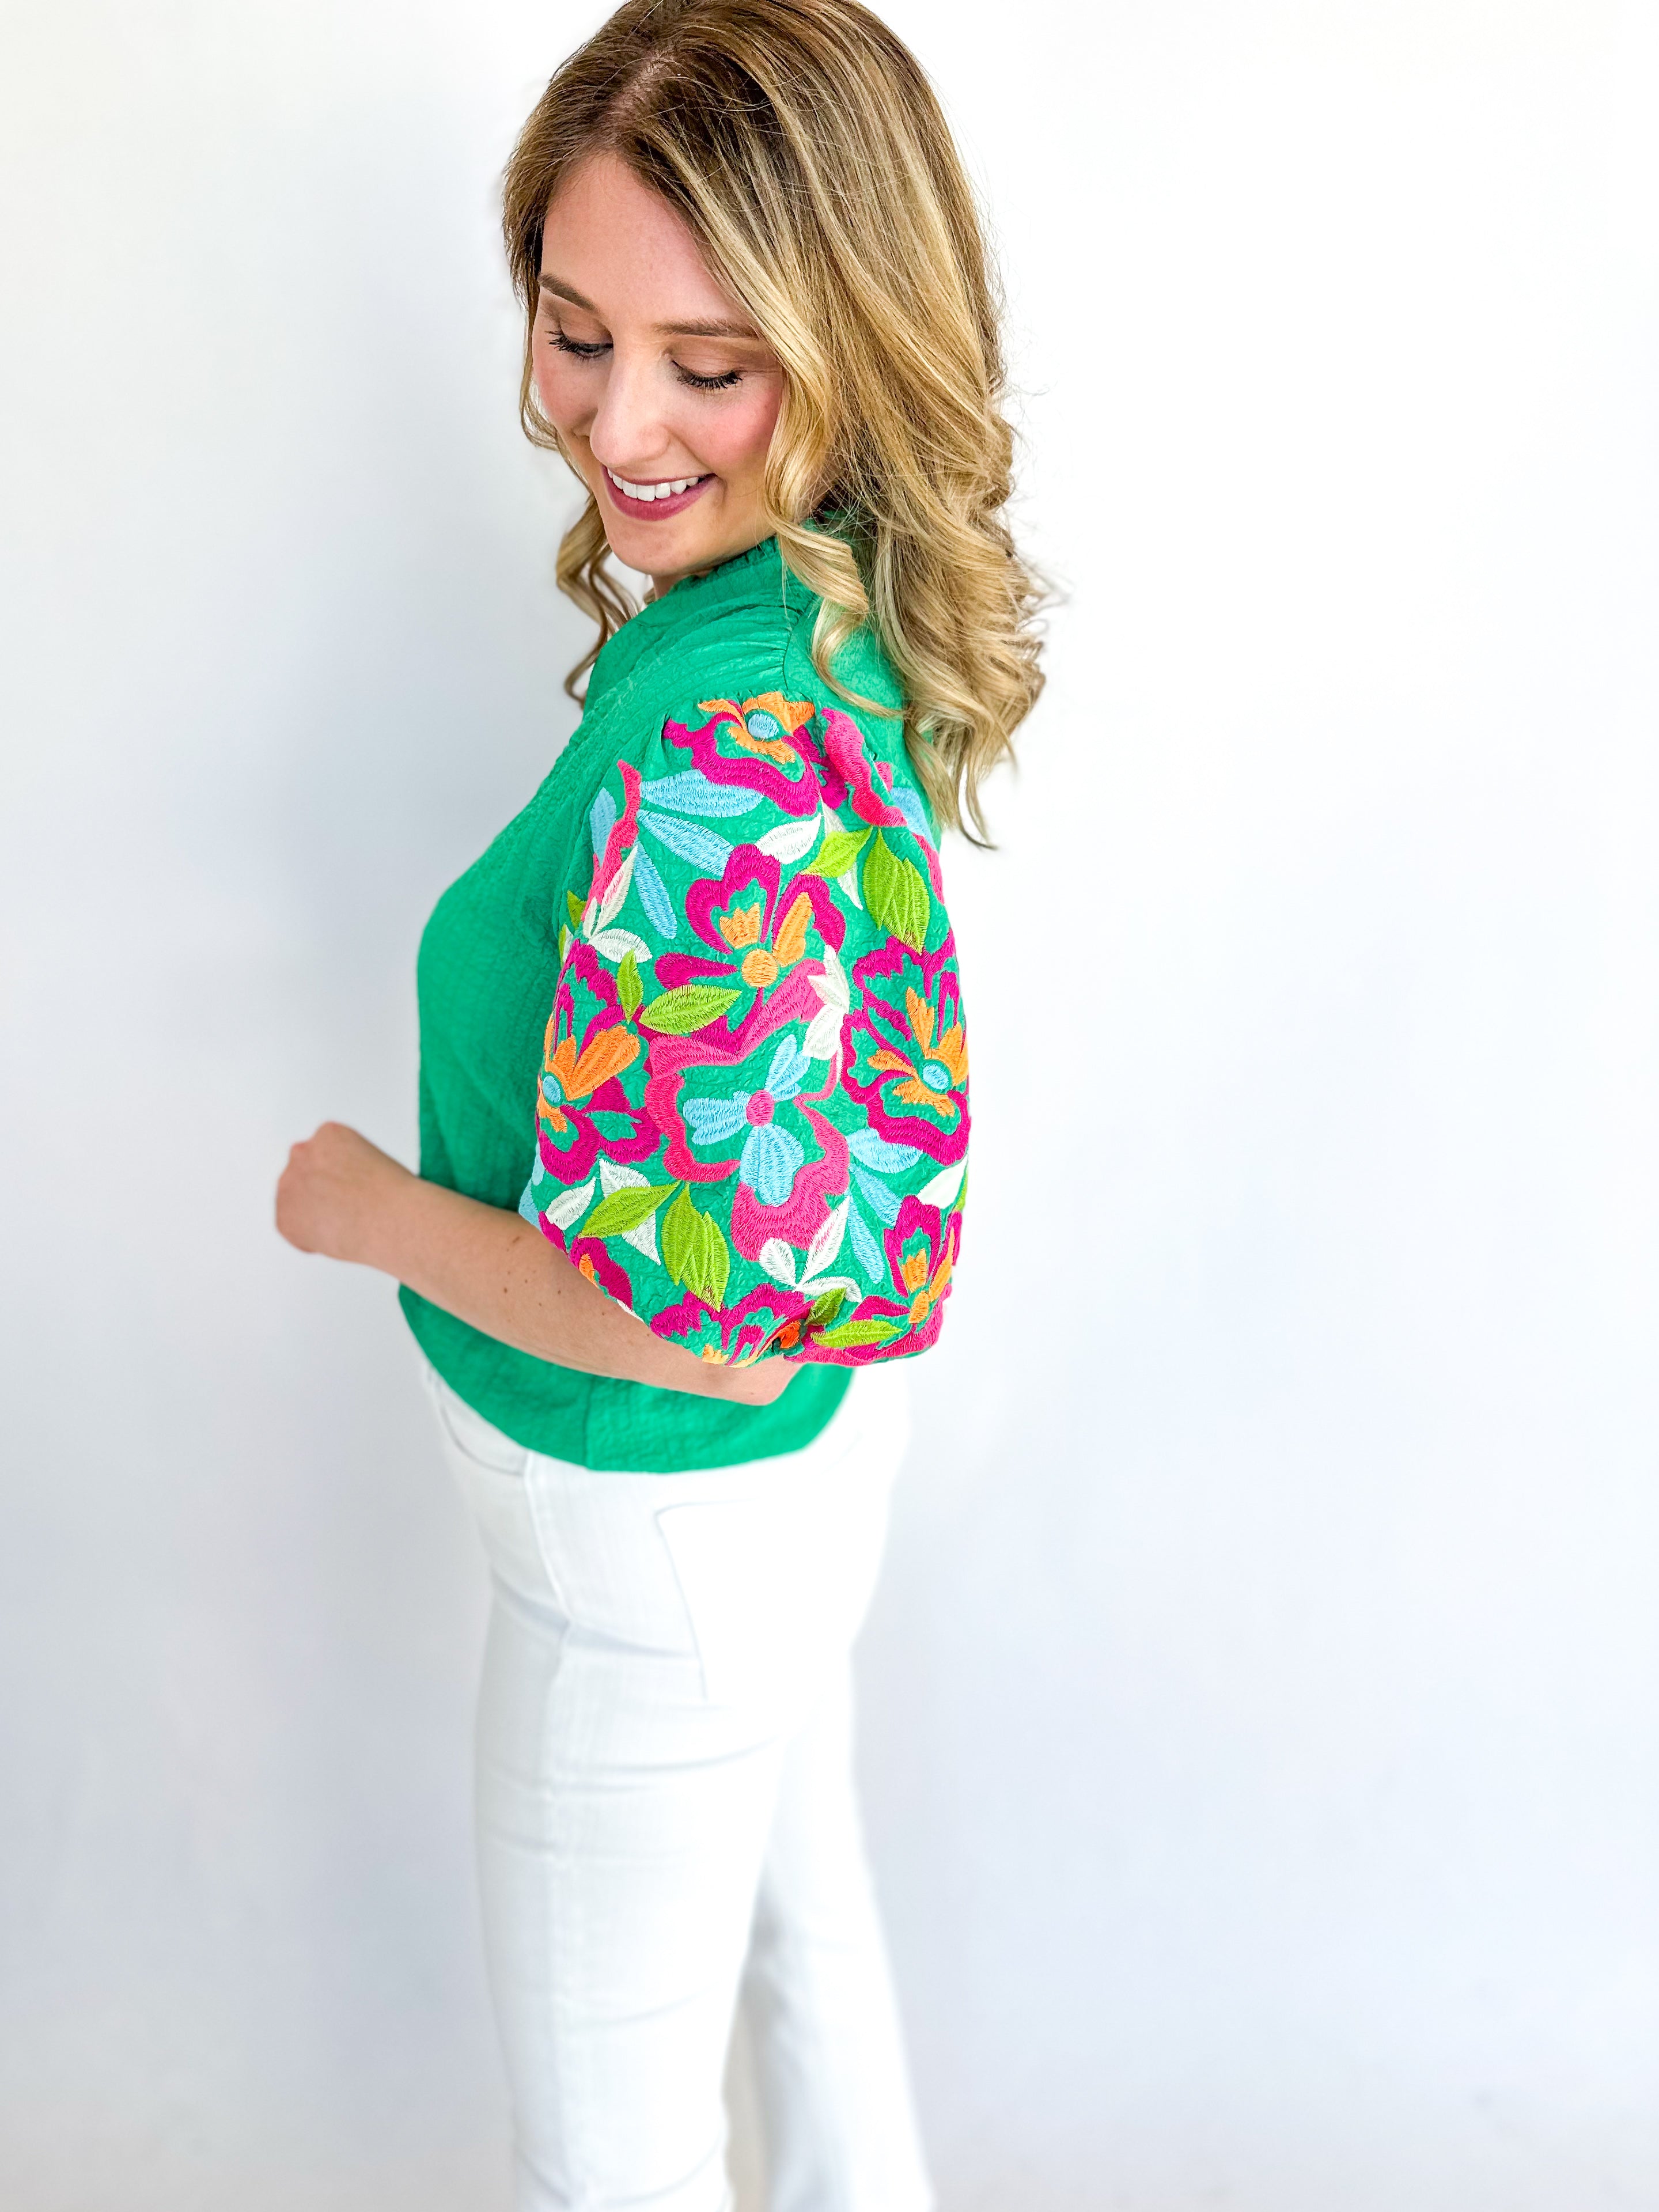 Kelly Green Embroidered Blouse - THML-200 Fashion Blouses-THML-July & June Women's Fashion Boutique Located in San Antonio, Texas